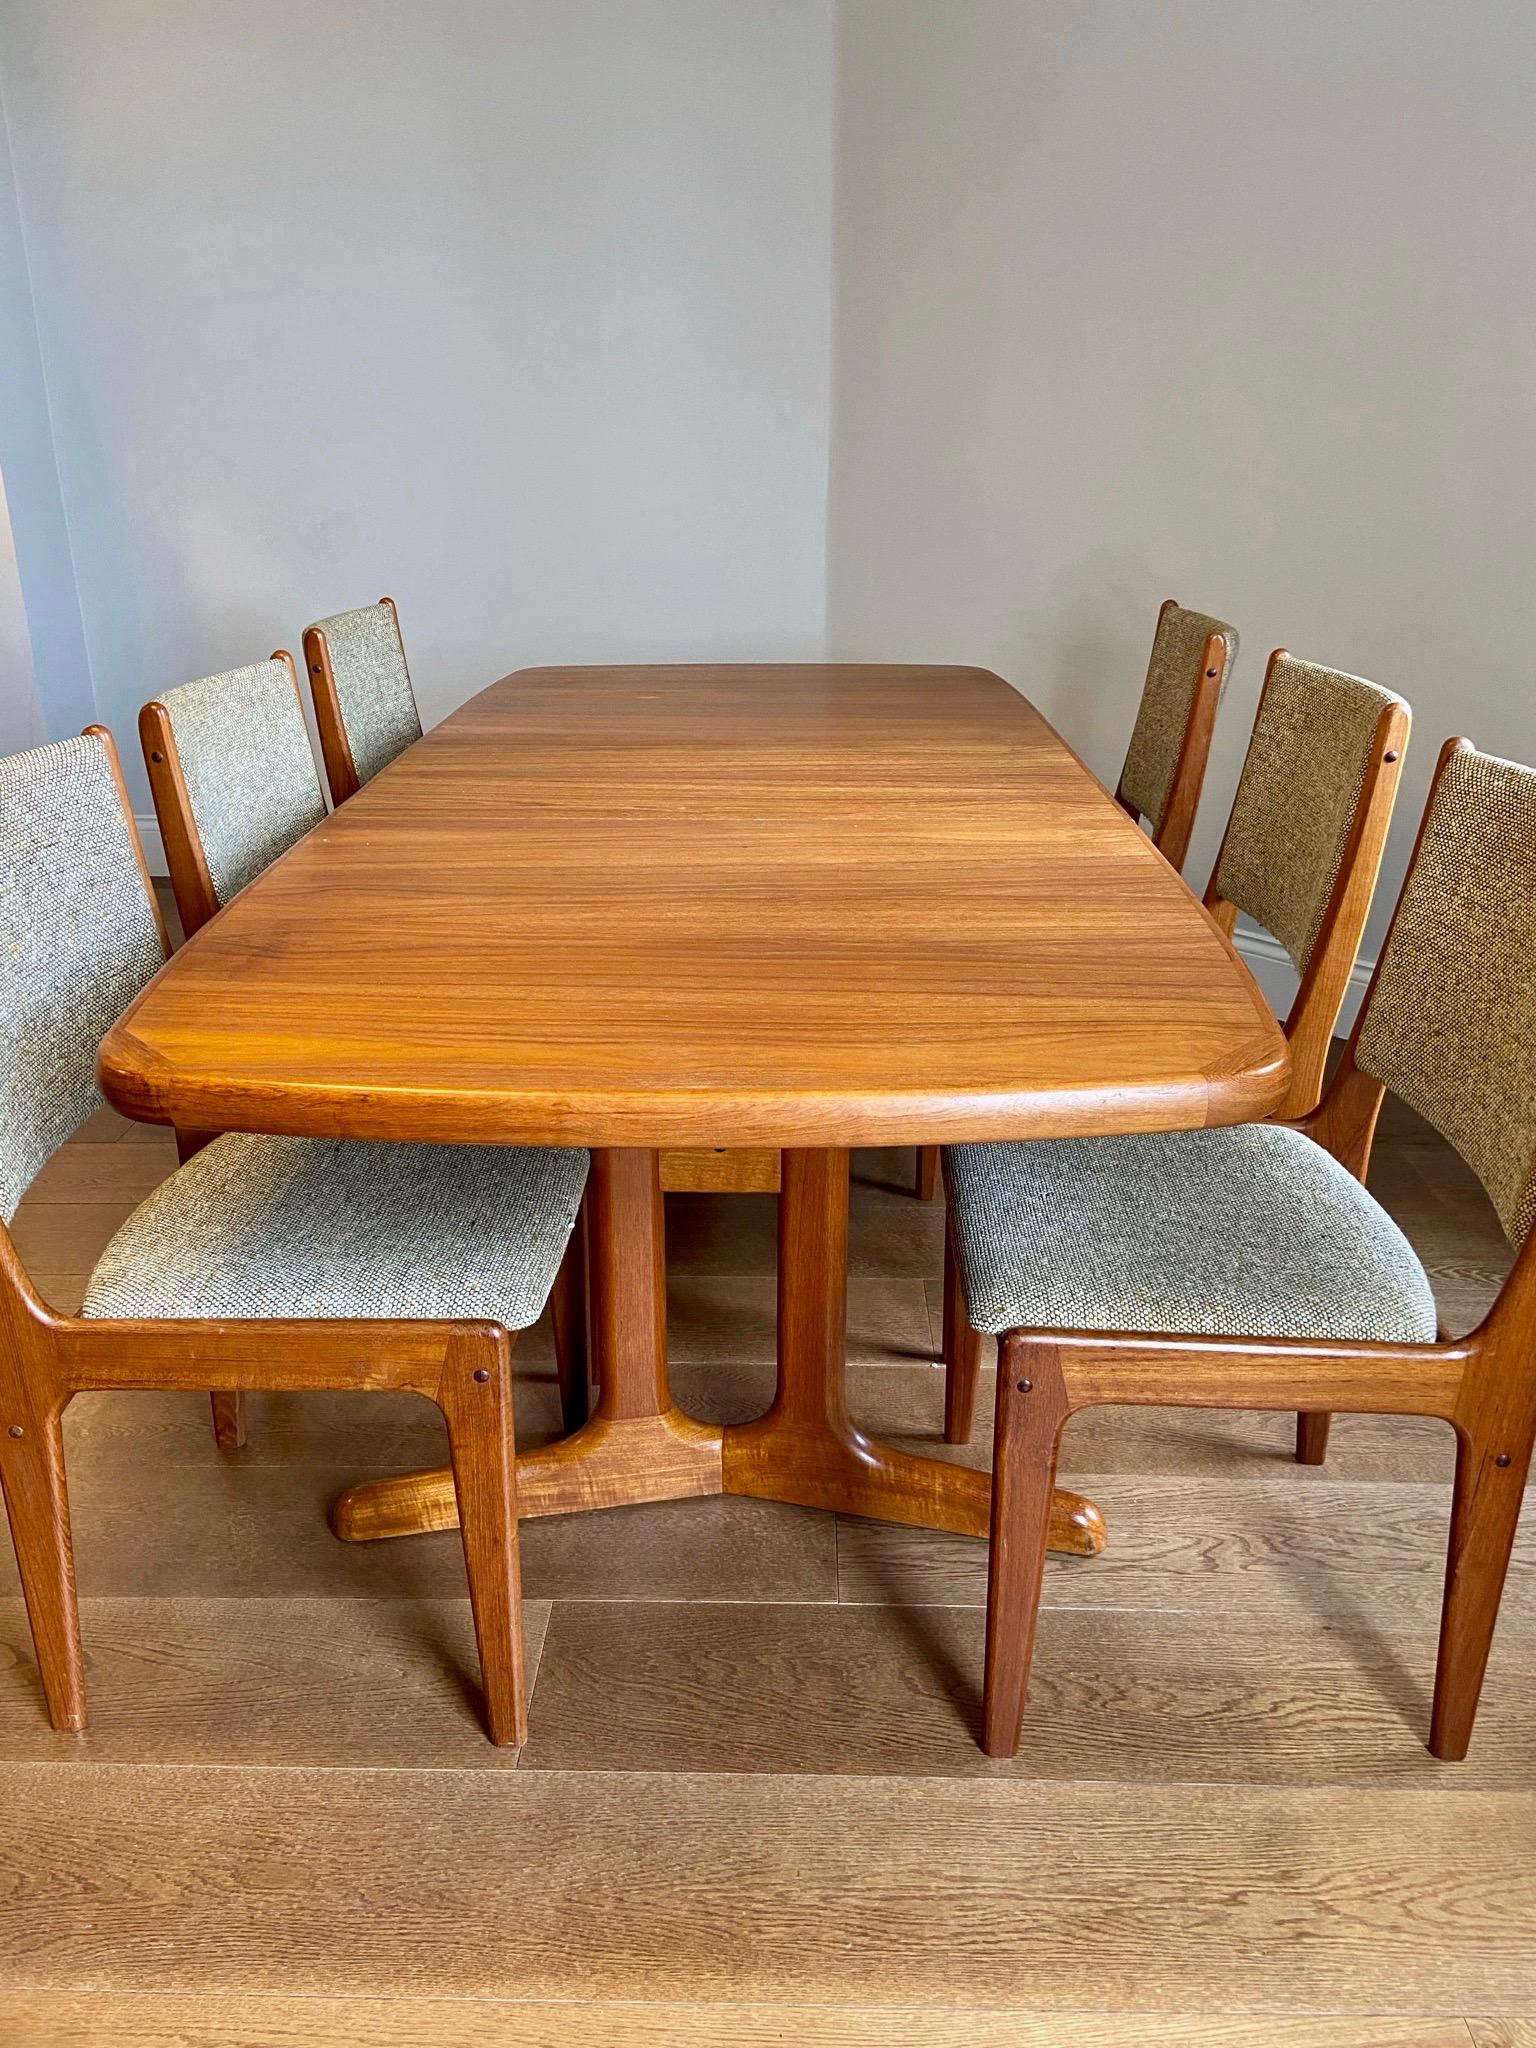 Wonderful teak dining table with six matching chairs from AM Møbler, Denmark. 
Crafted in solid teak wood with a fabulous contrast in color to its corners. Stamped 'AM Denmark' on the underside part of the table. The chairs are made with the same